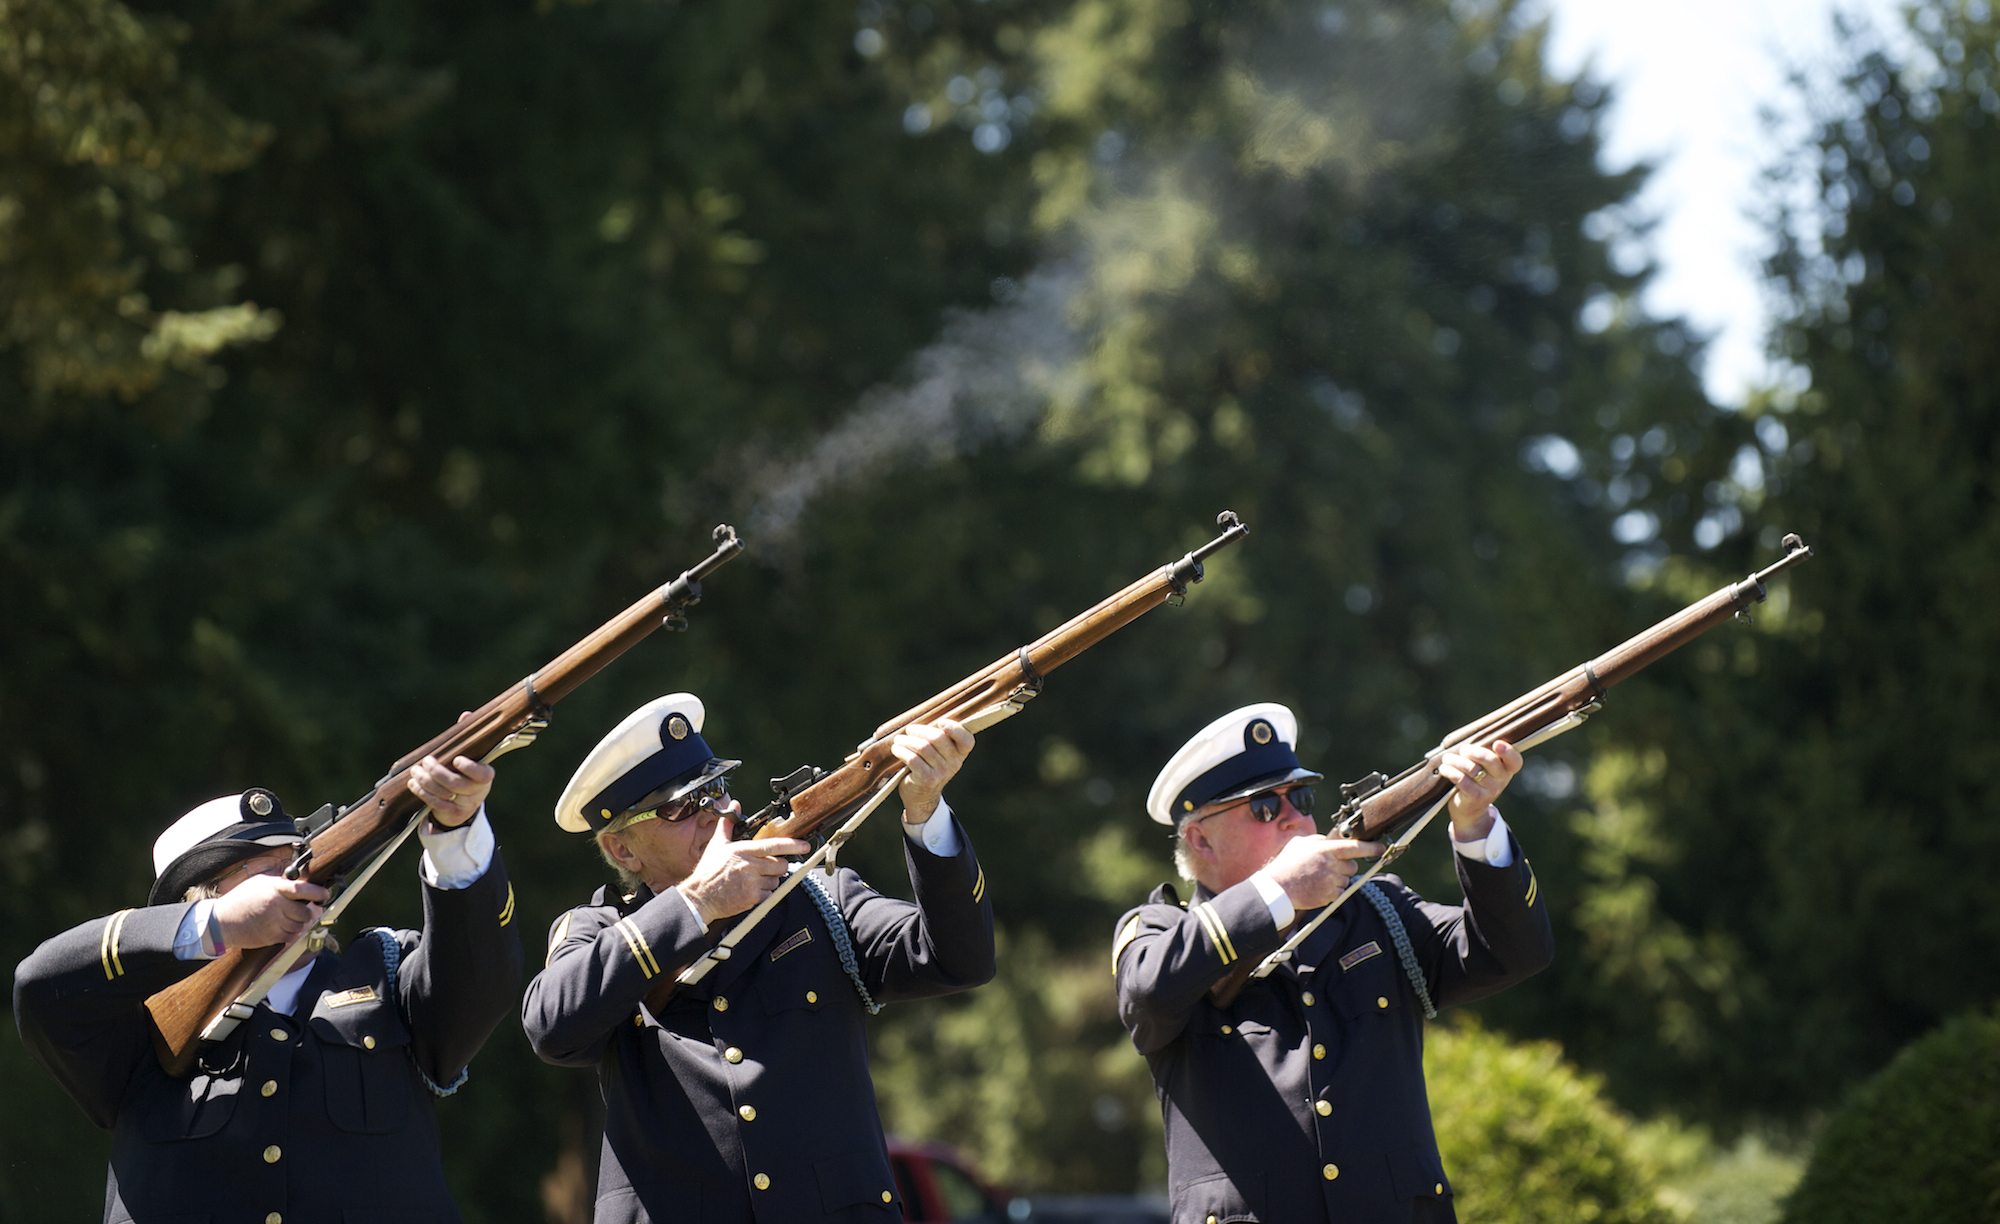 Members of Post 122, from left, Gail Branum, Harlee Horell and Jim Martin, fire three volleys each Saturday during a memorial service for veterans that did not receive a full military funeral at Evergreen Memorial Gardens.